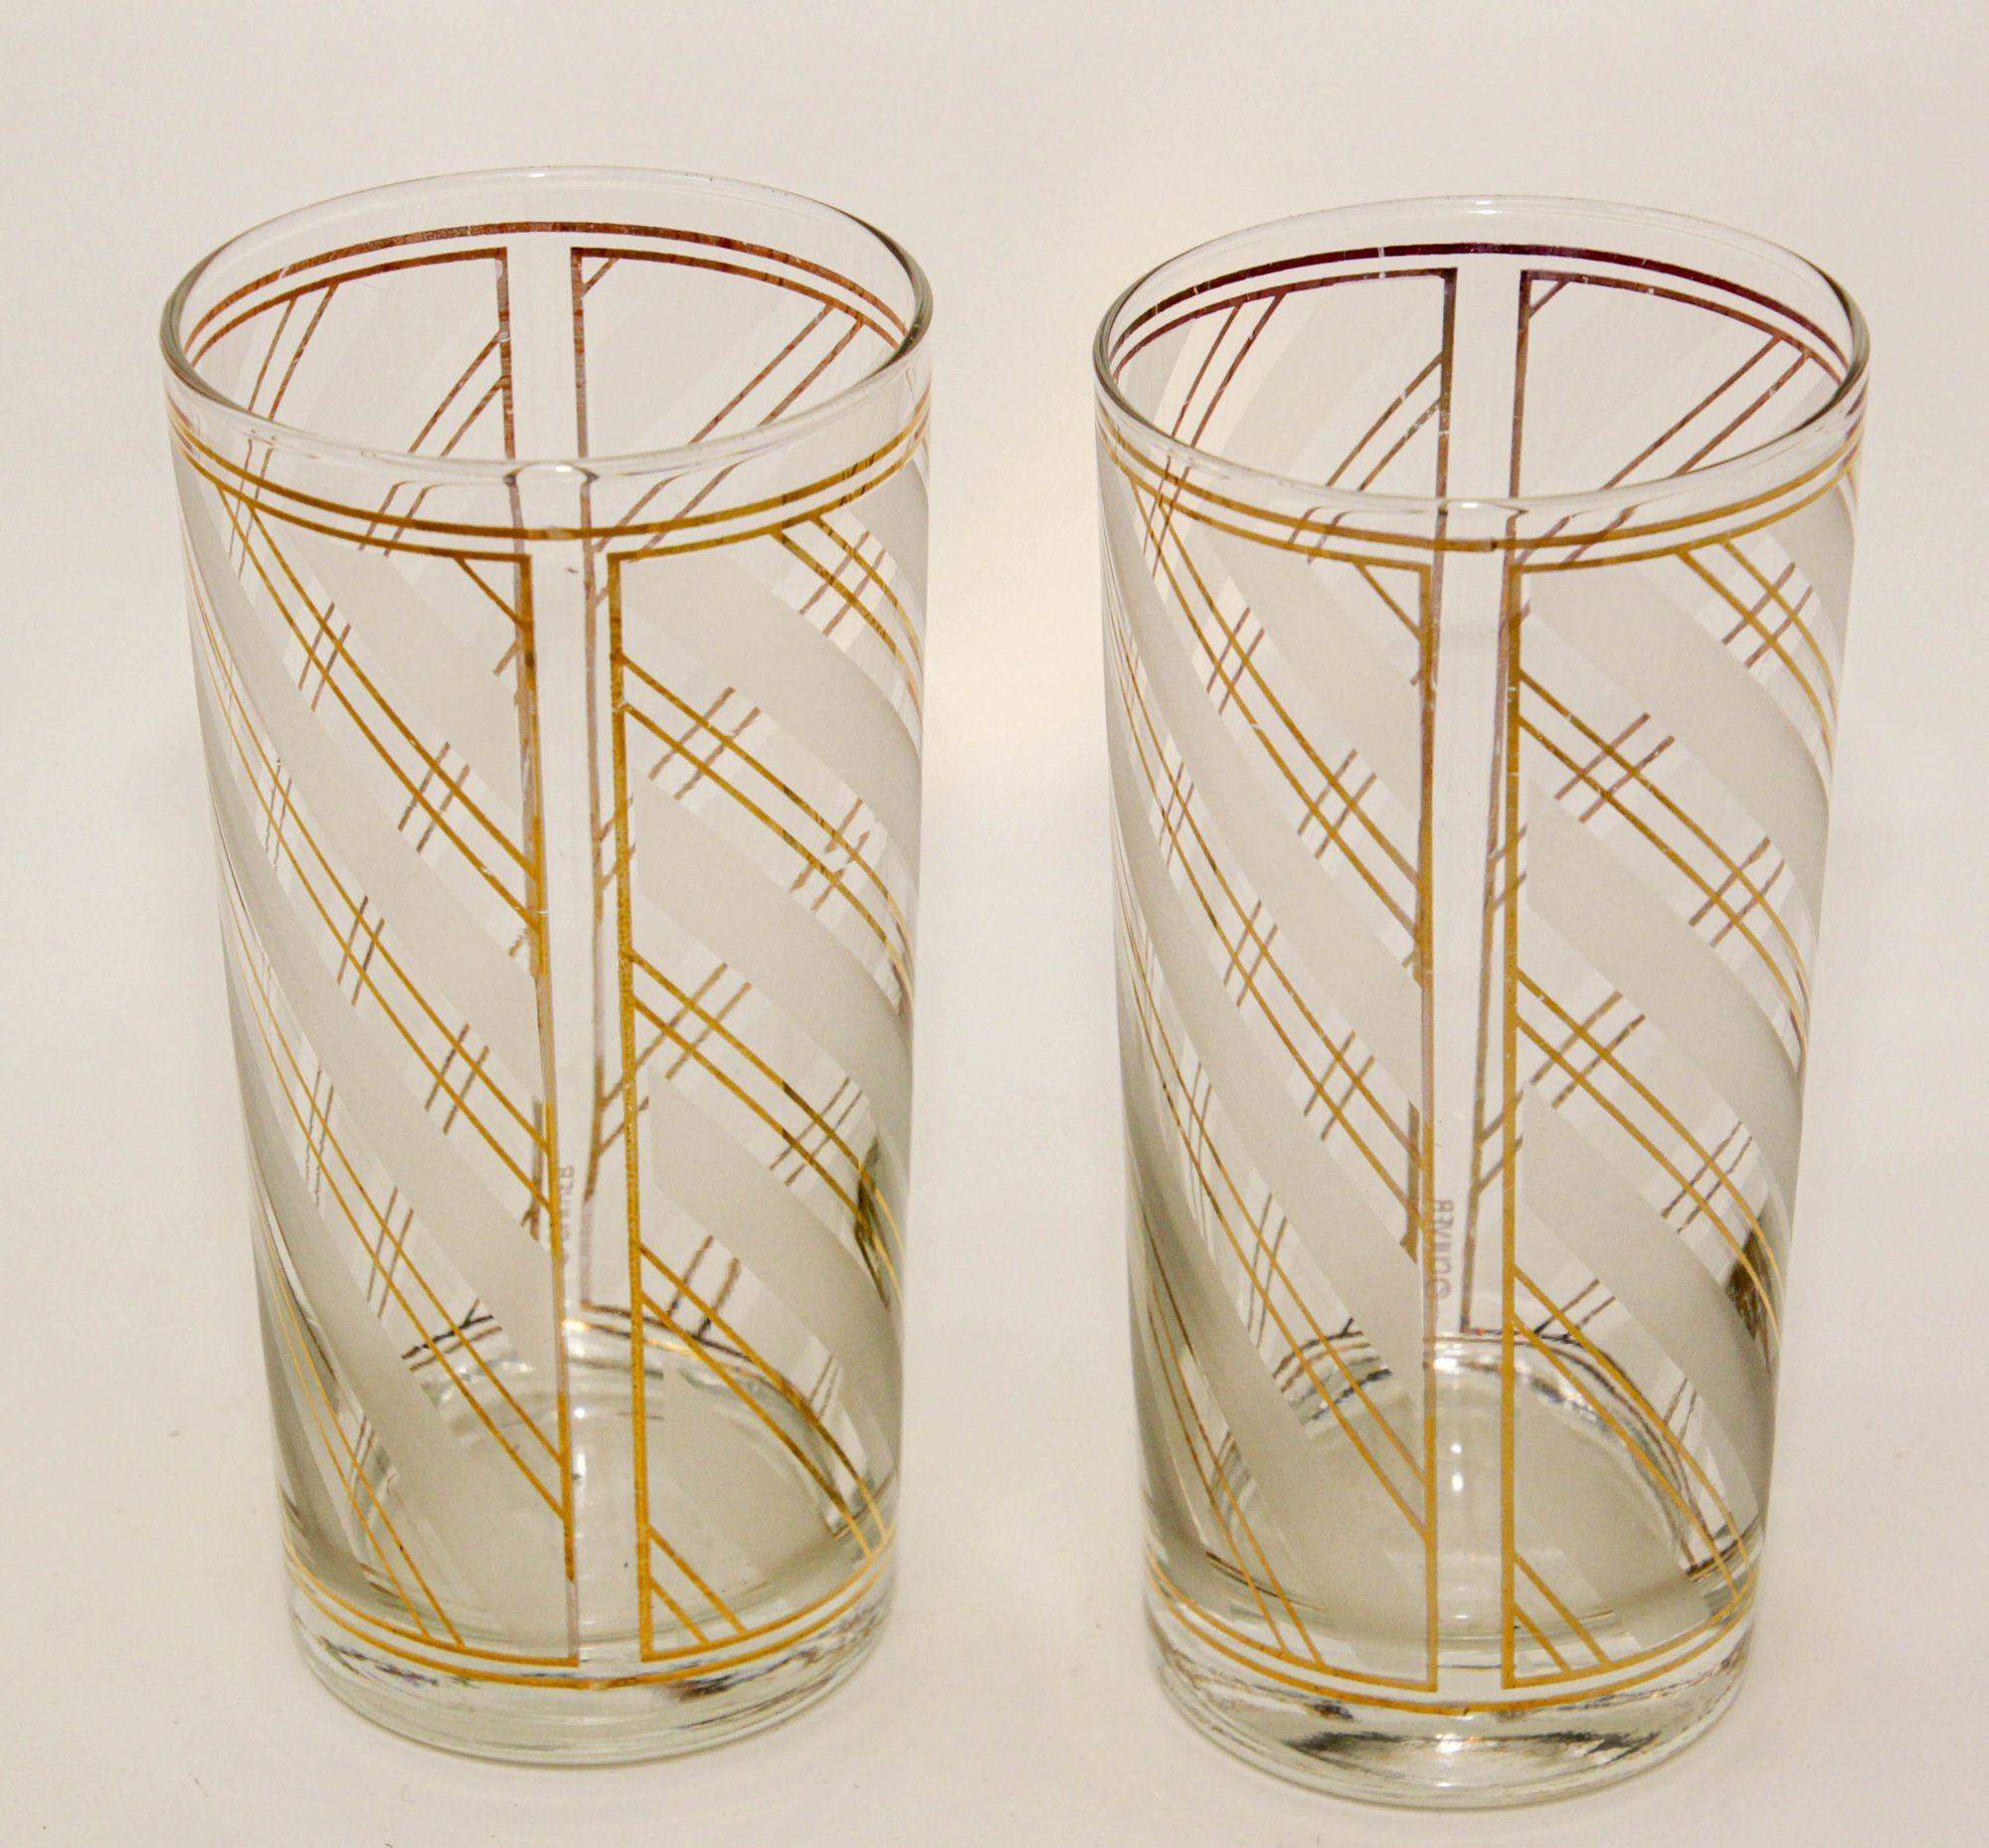 Vintage Art Deco Culver Gold Striped Set of 2 High Ball Tumblers In Good Condition For Sale In North Hollywood, CA